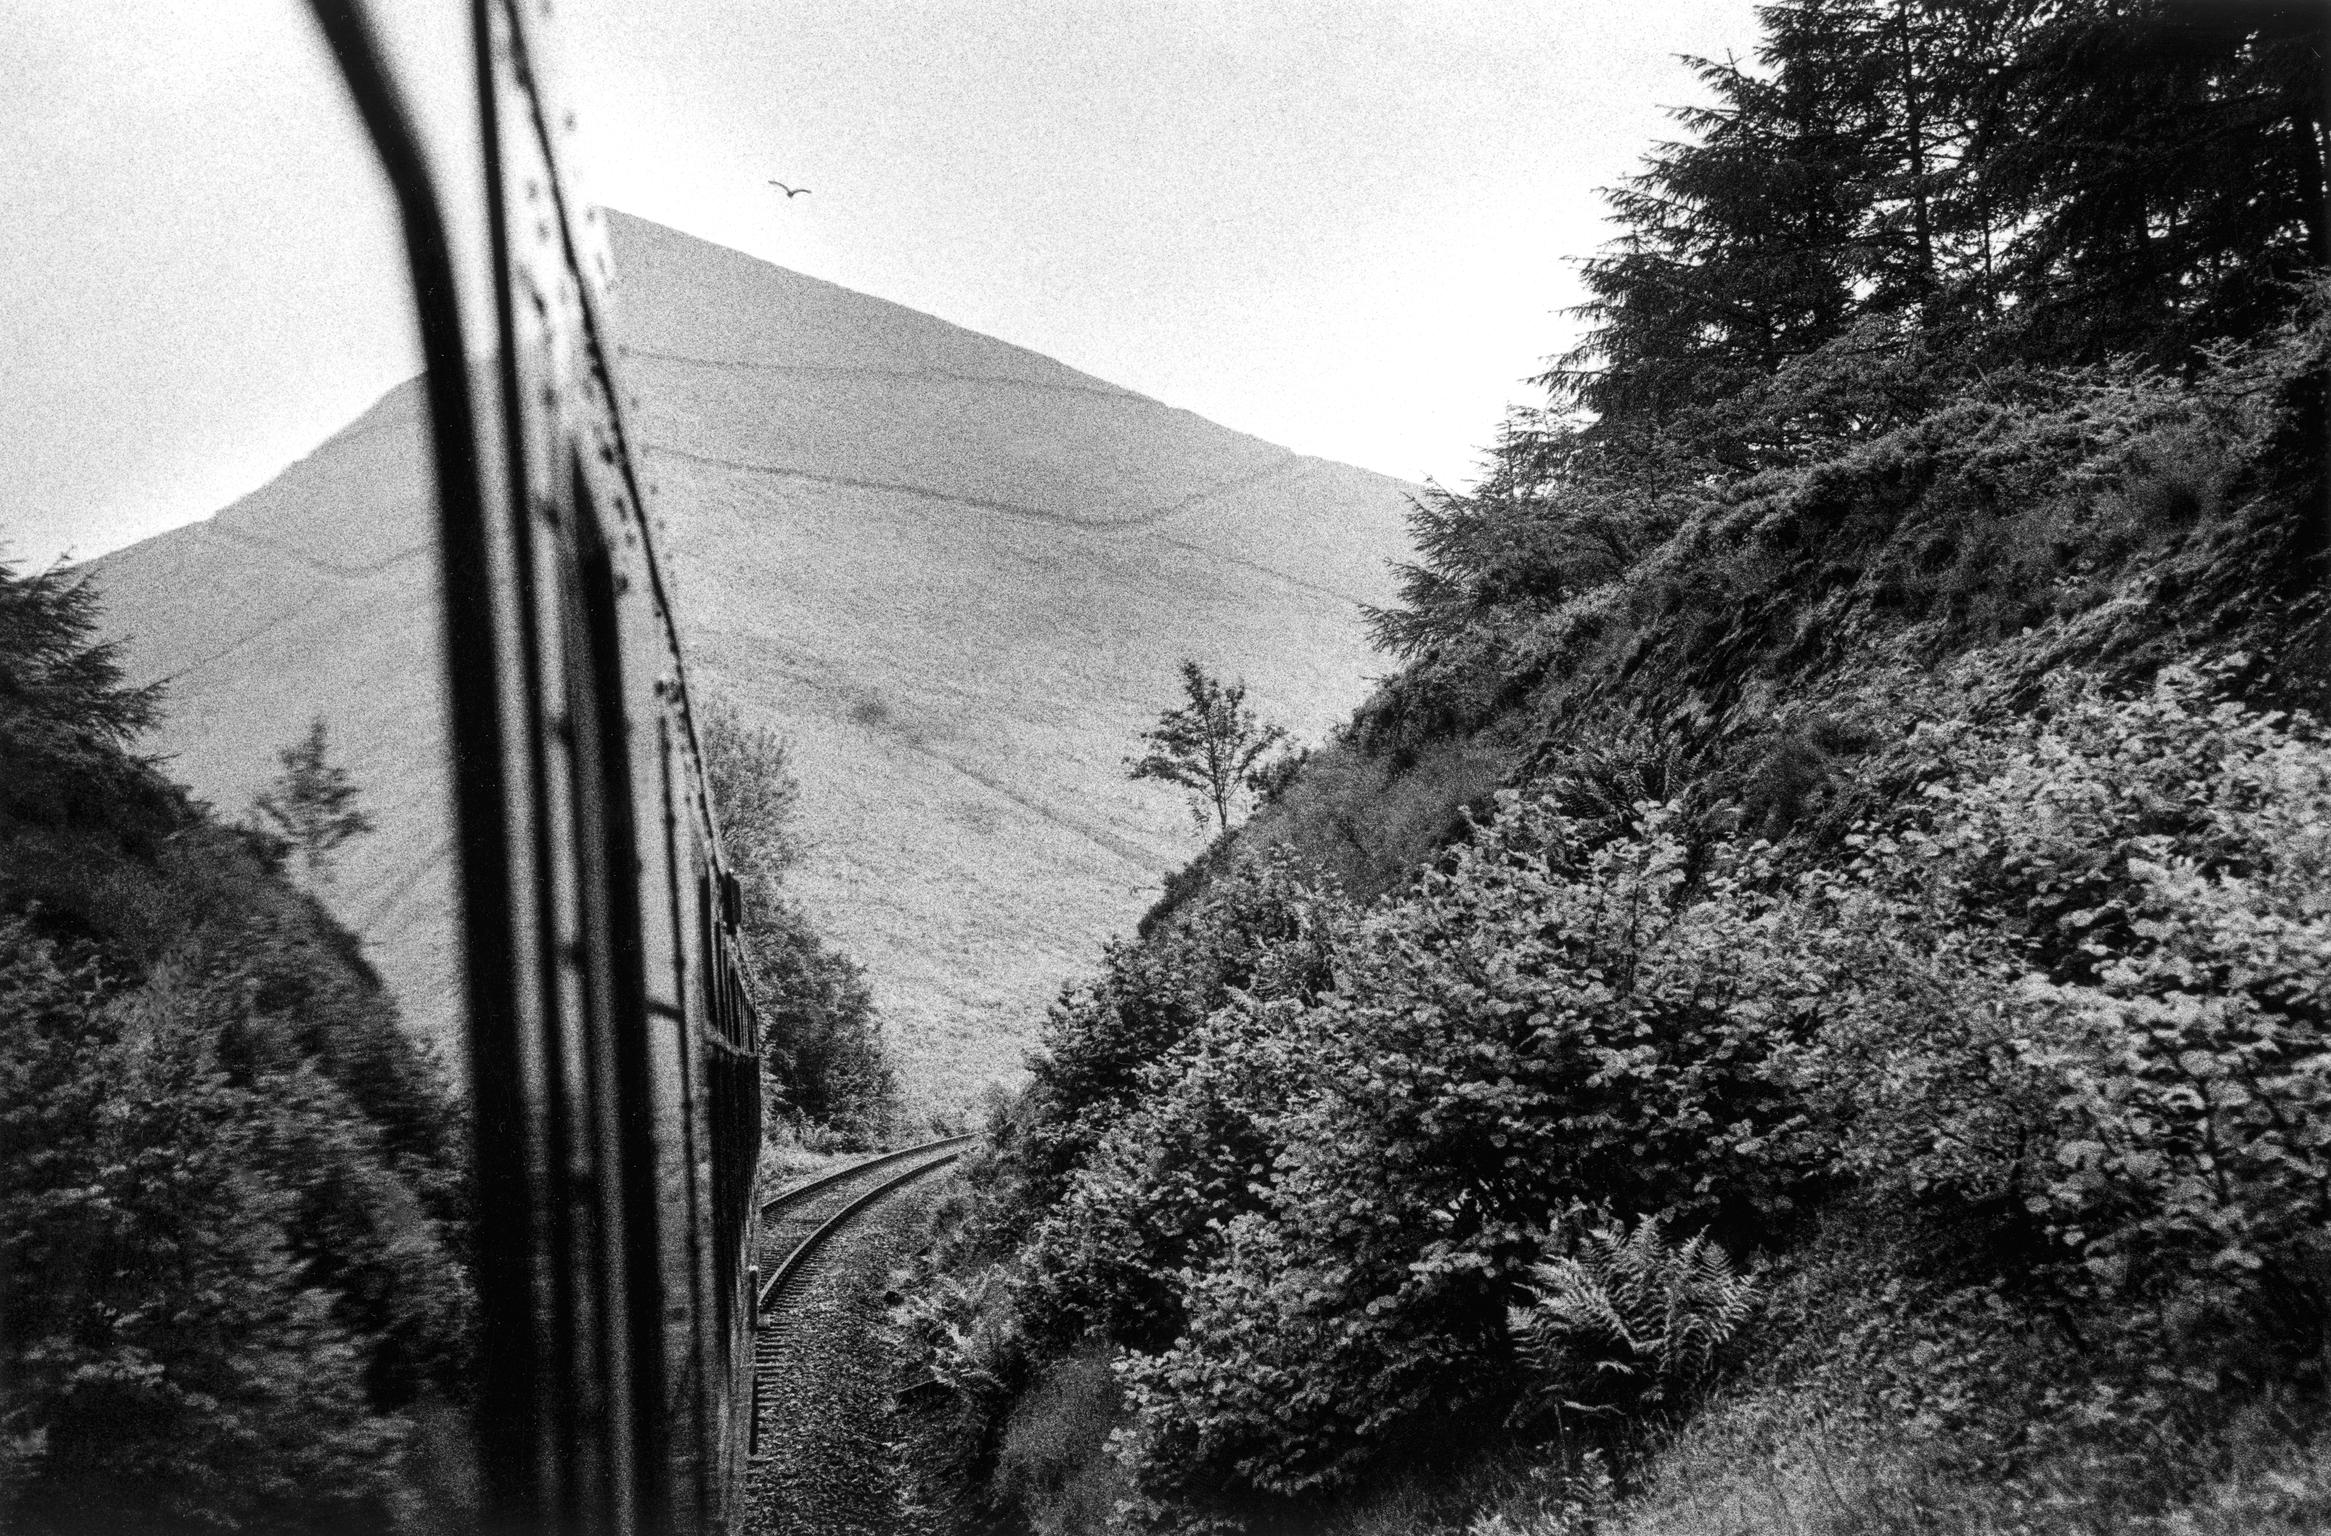 From the train window central Wales railway line. Cynghordy, Wales